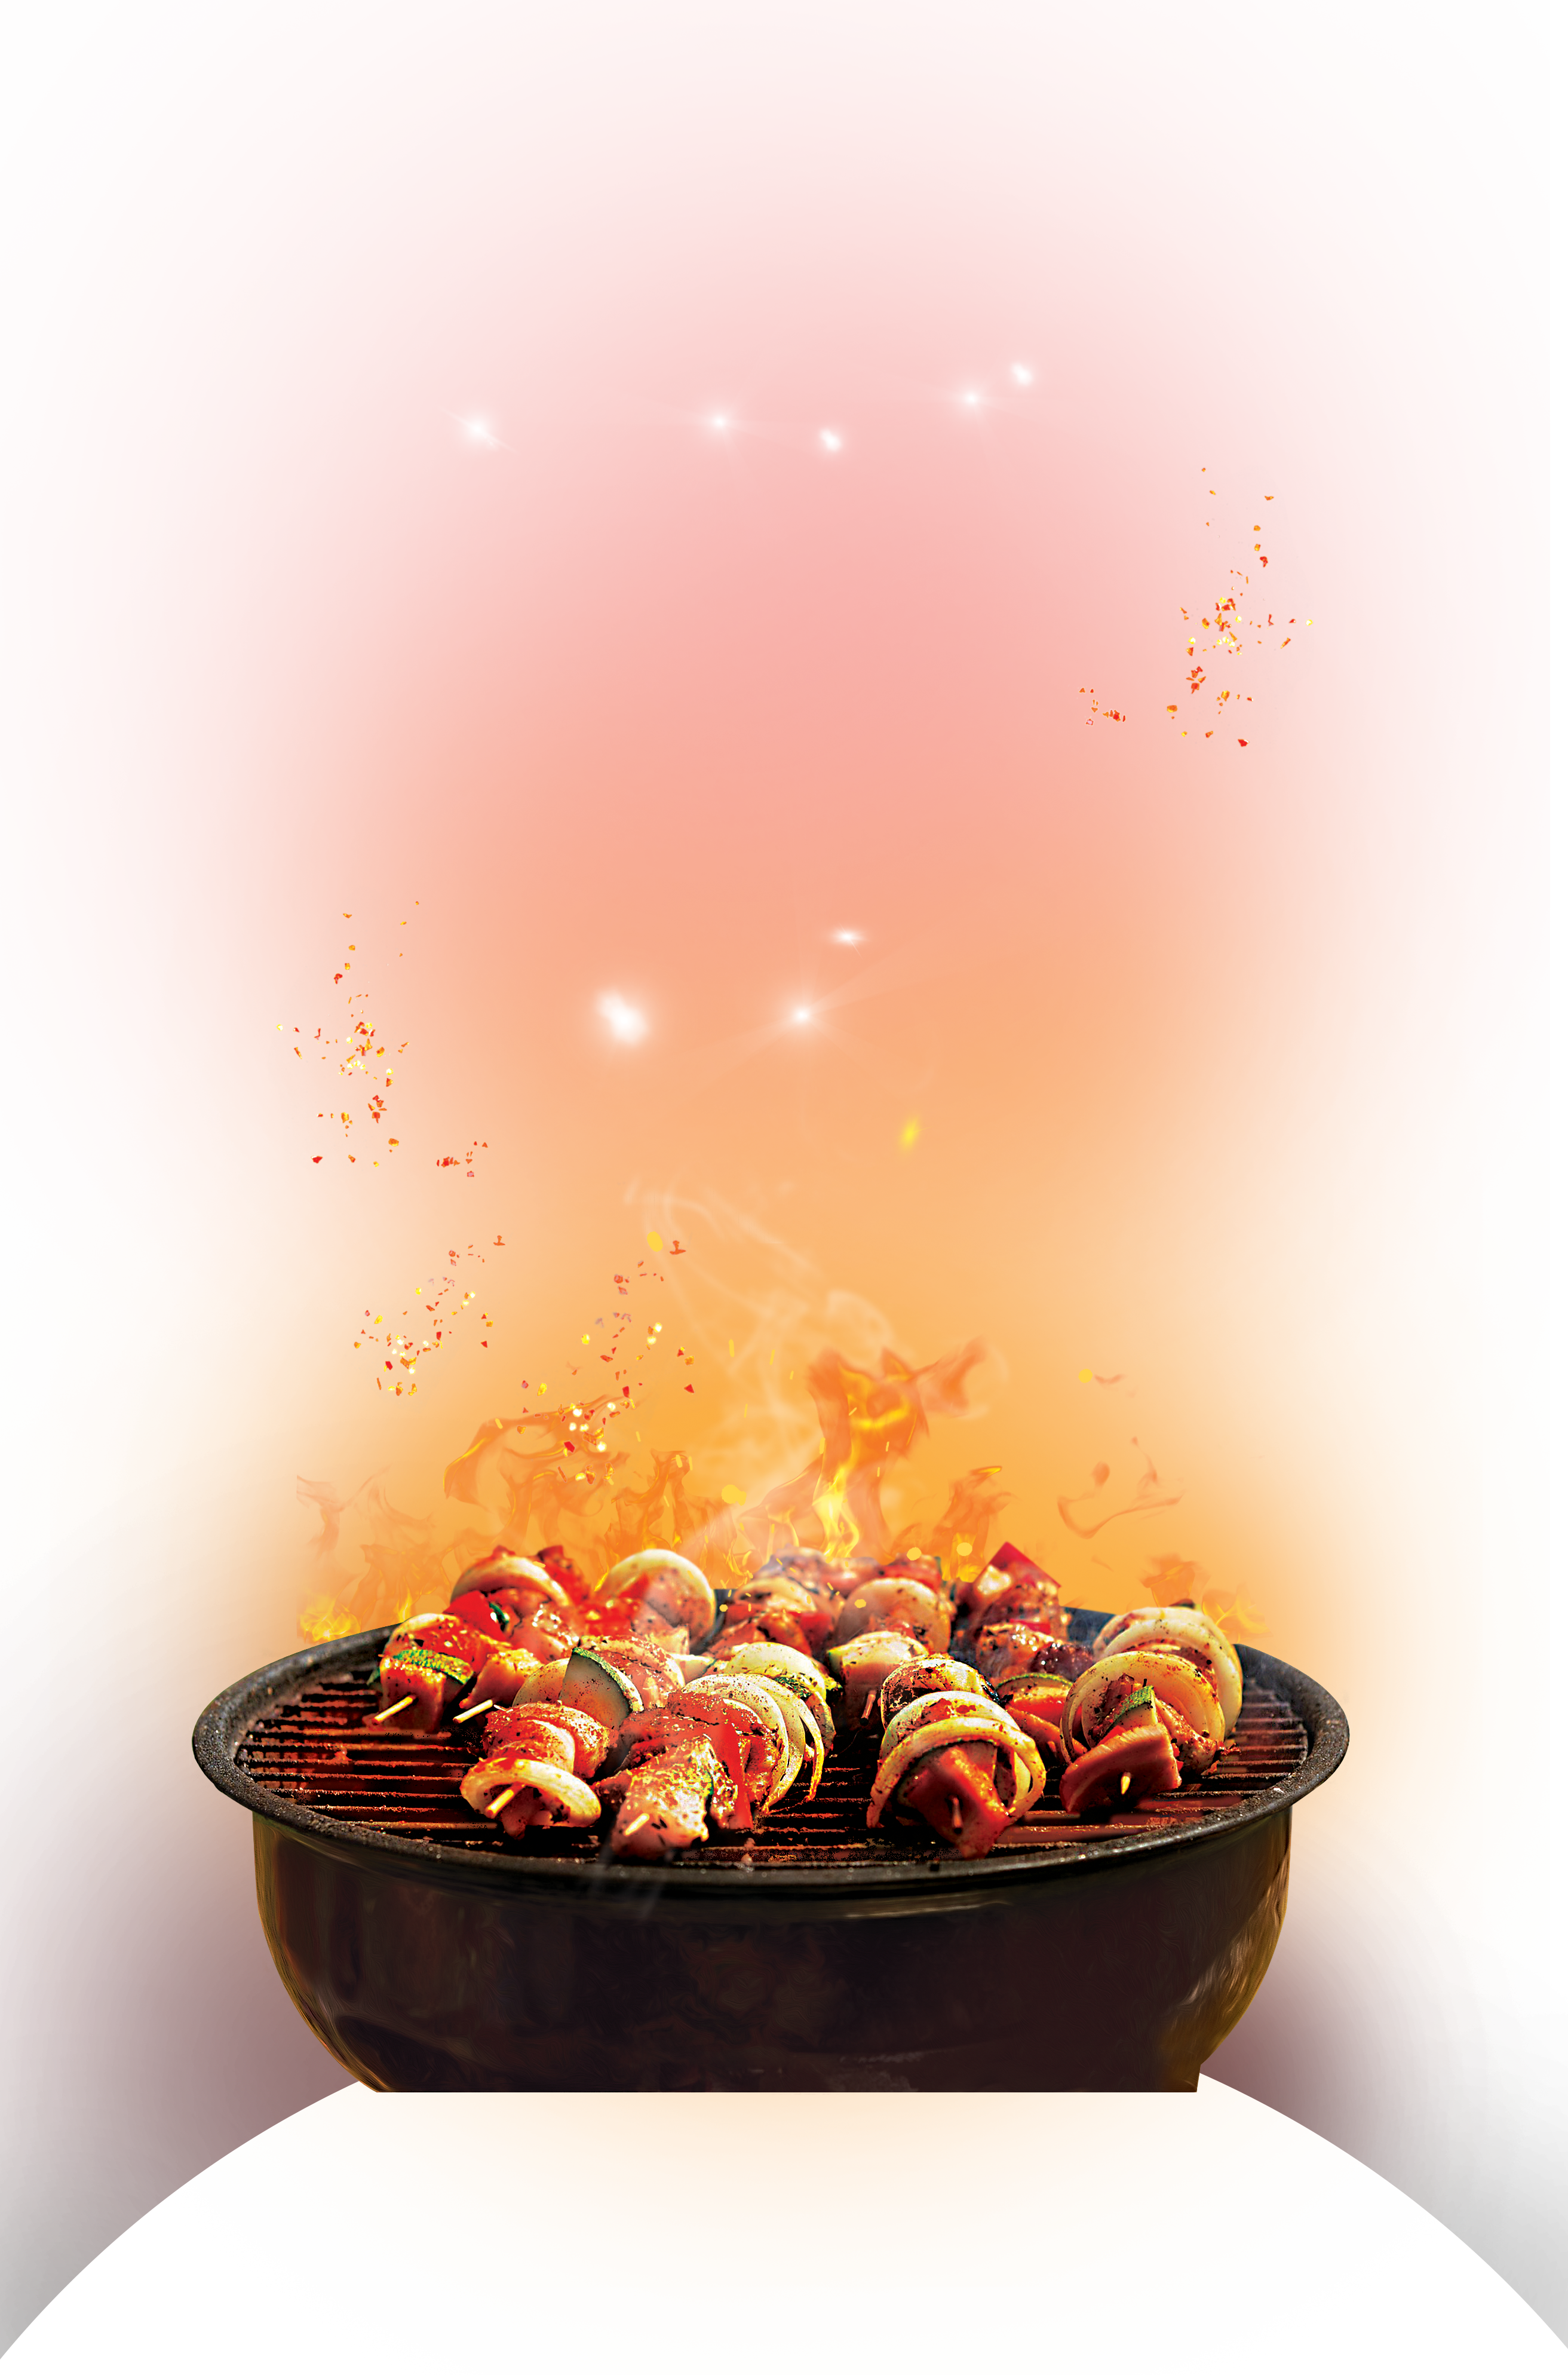 Barbecue cook on Grill PNG Image - PurePNG | Free transparent CC0 PNG ...